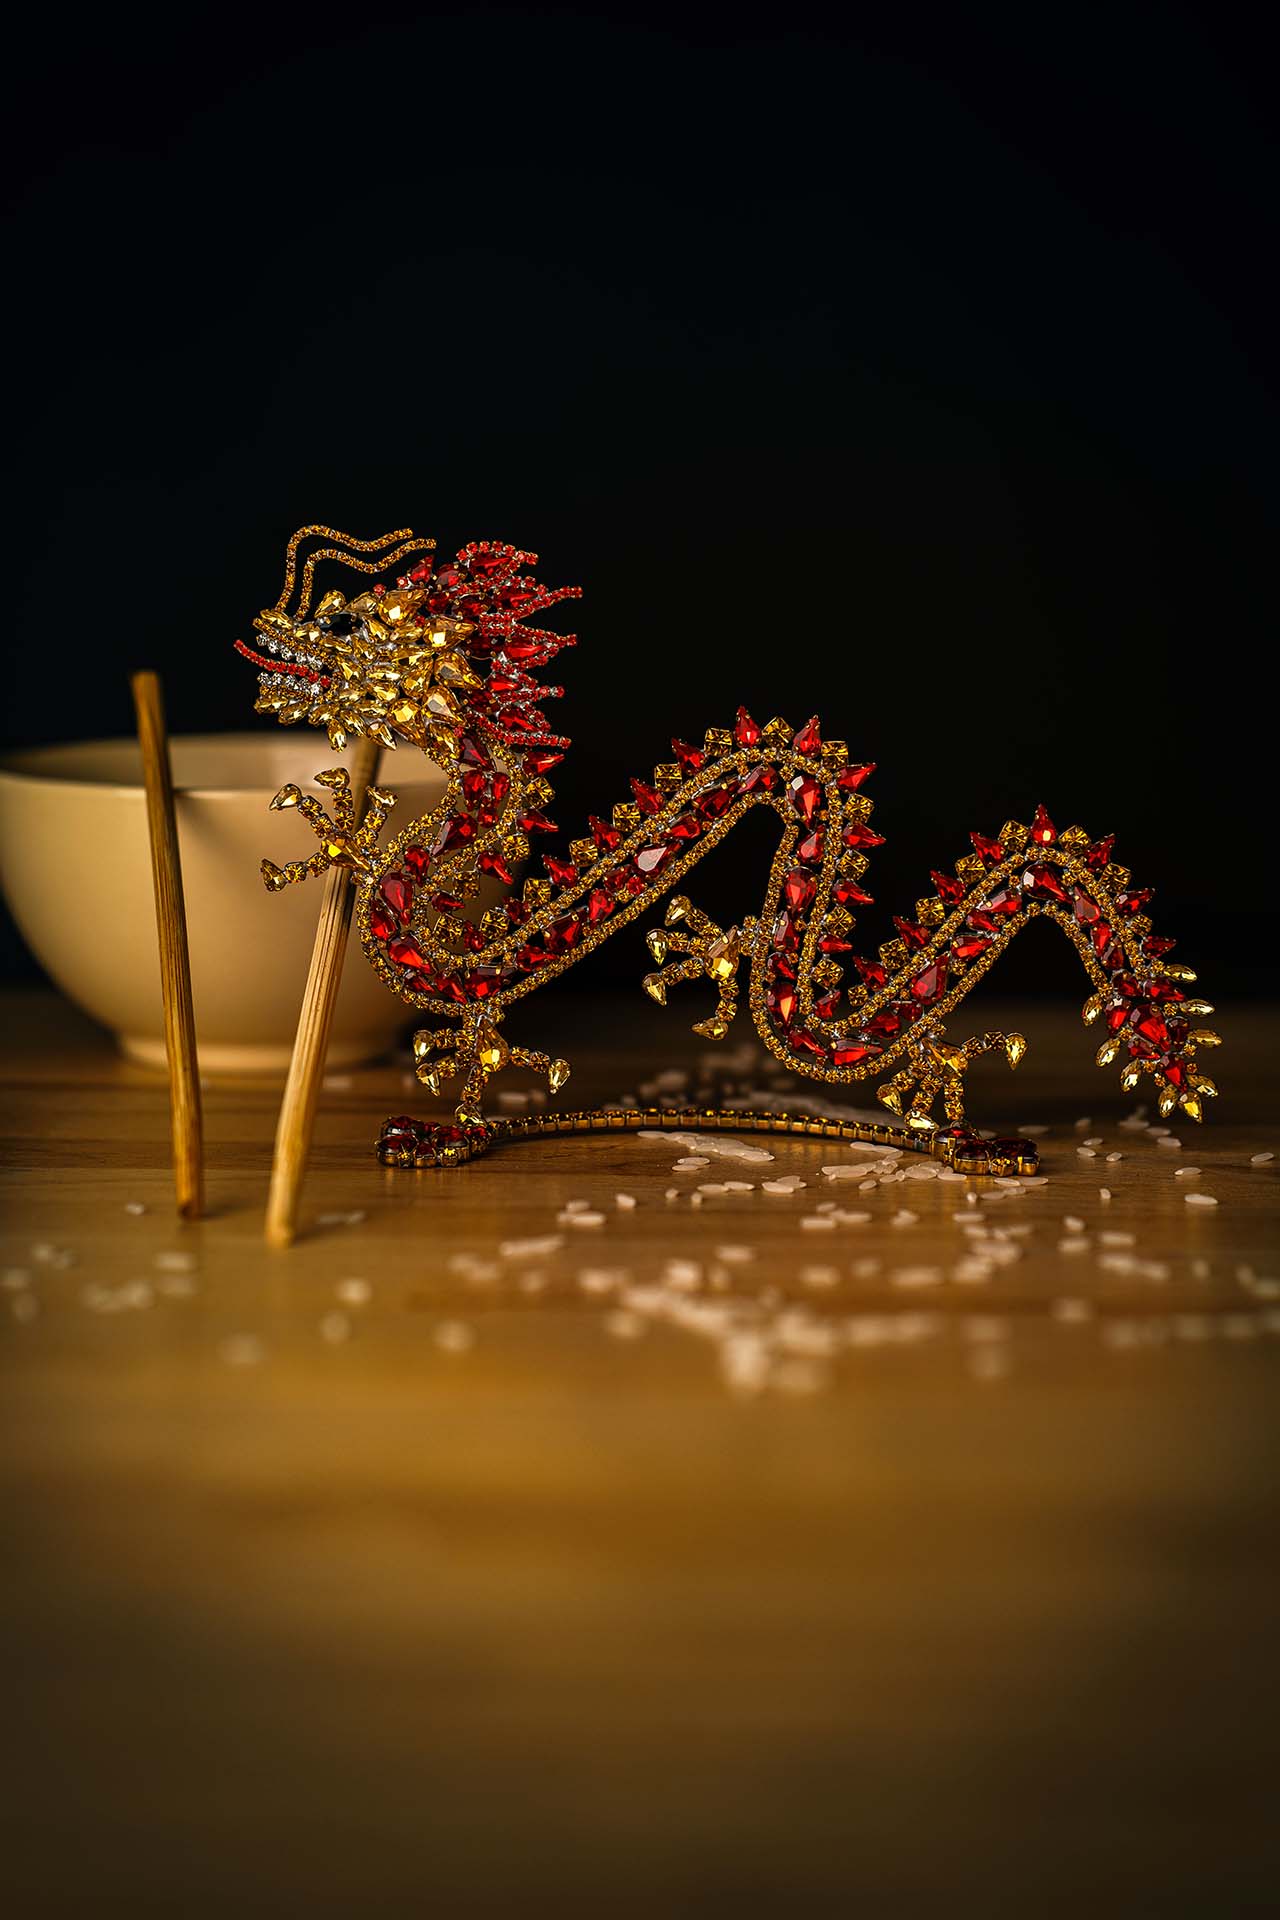 Rhinestone chinese dragon decoration. Red and gold crystals